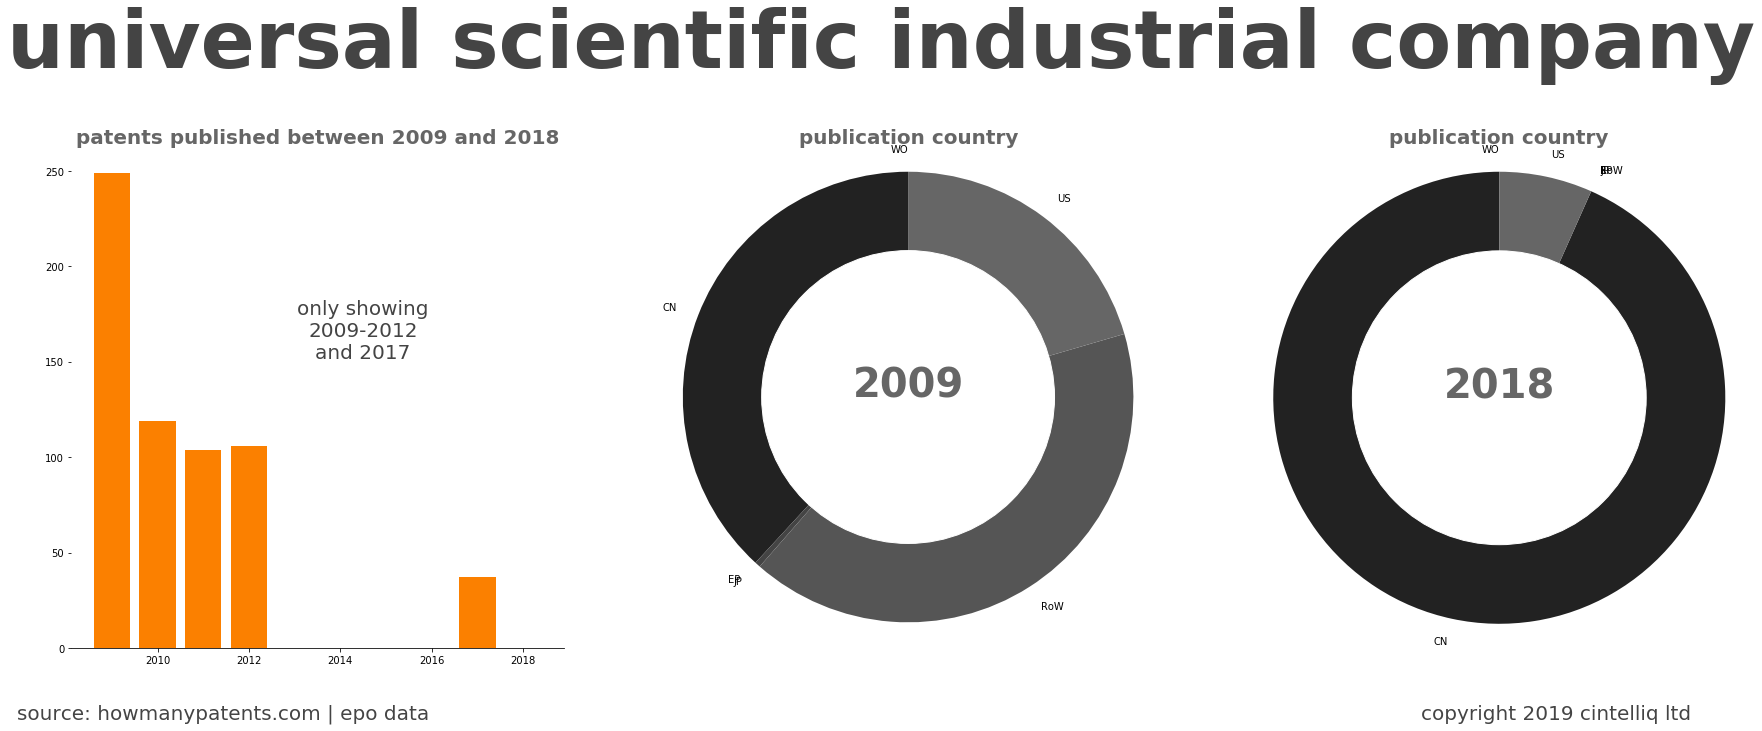 summary of patents for Universal Scientific Industrial Company